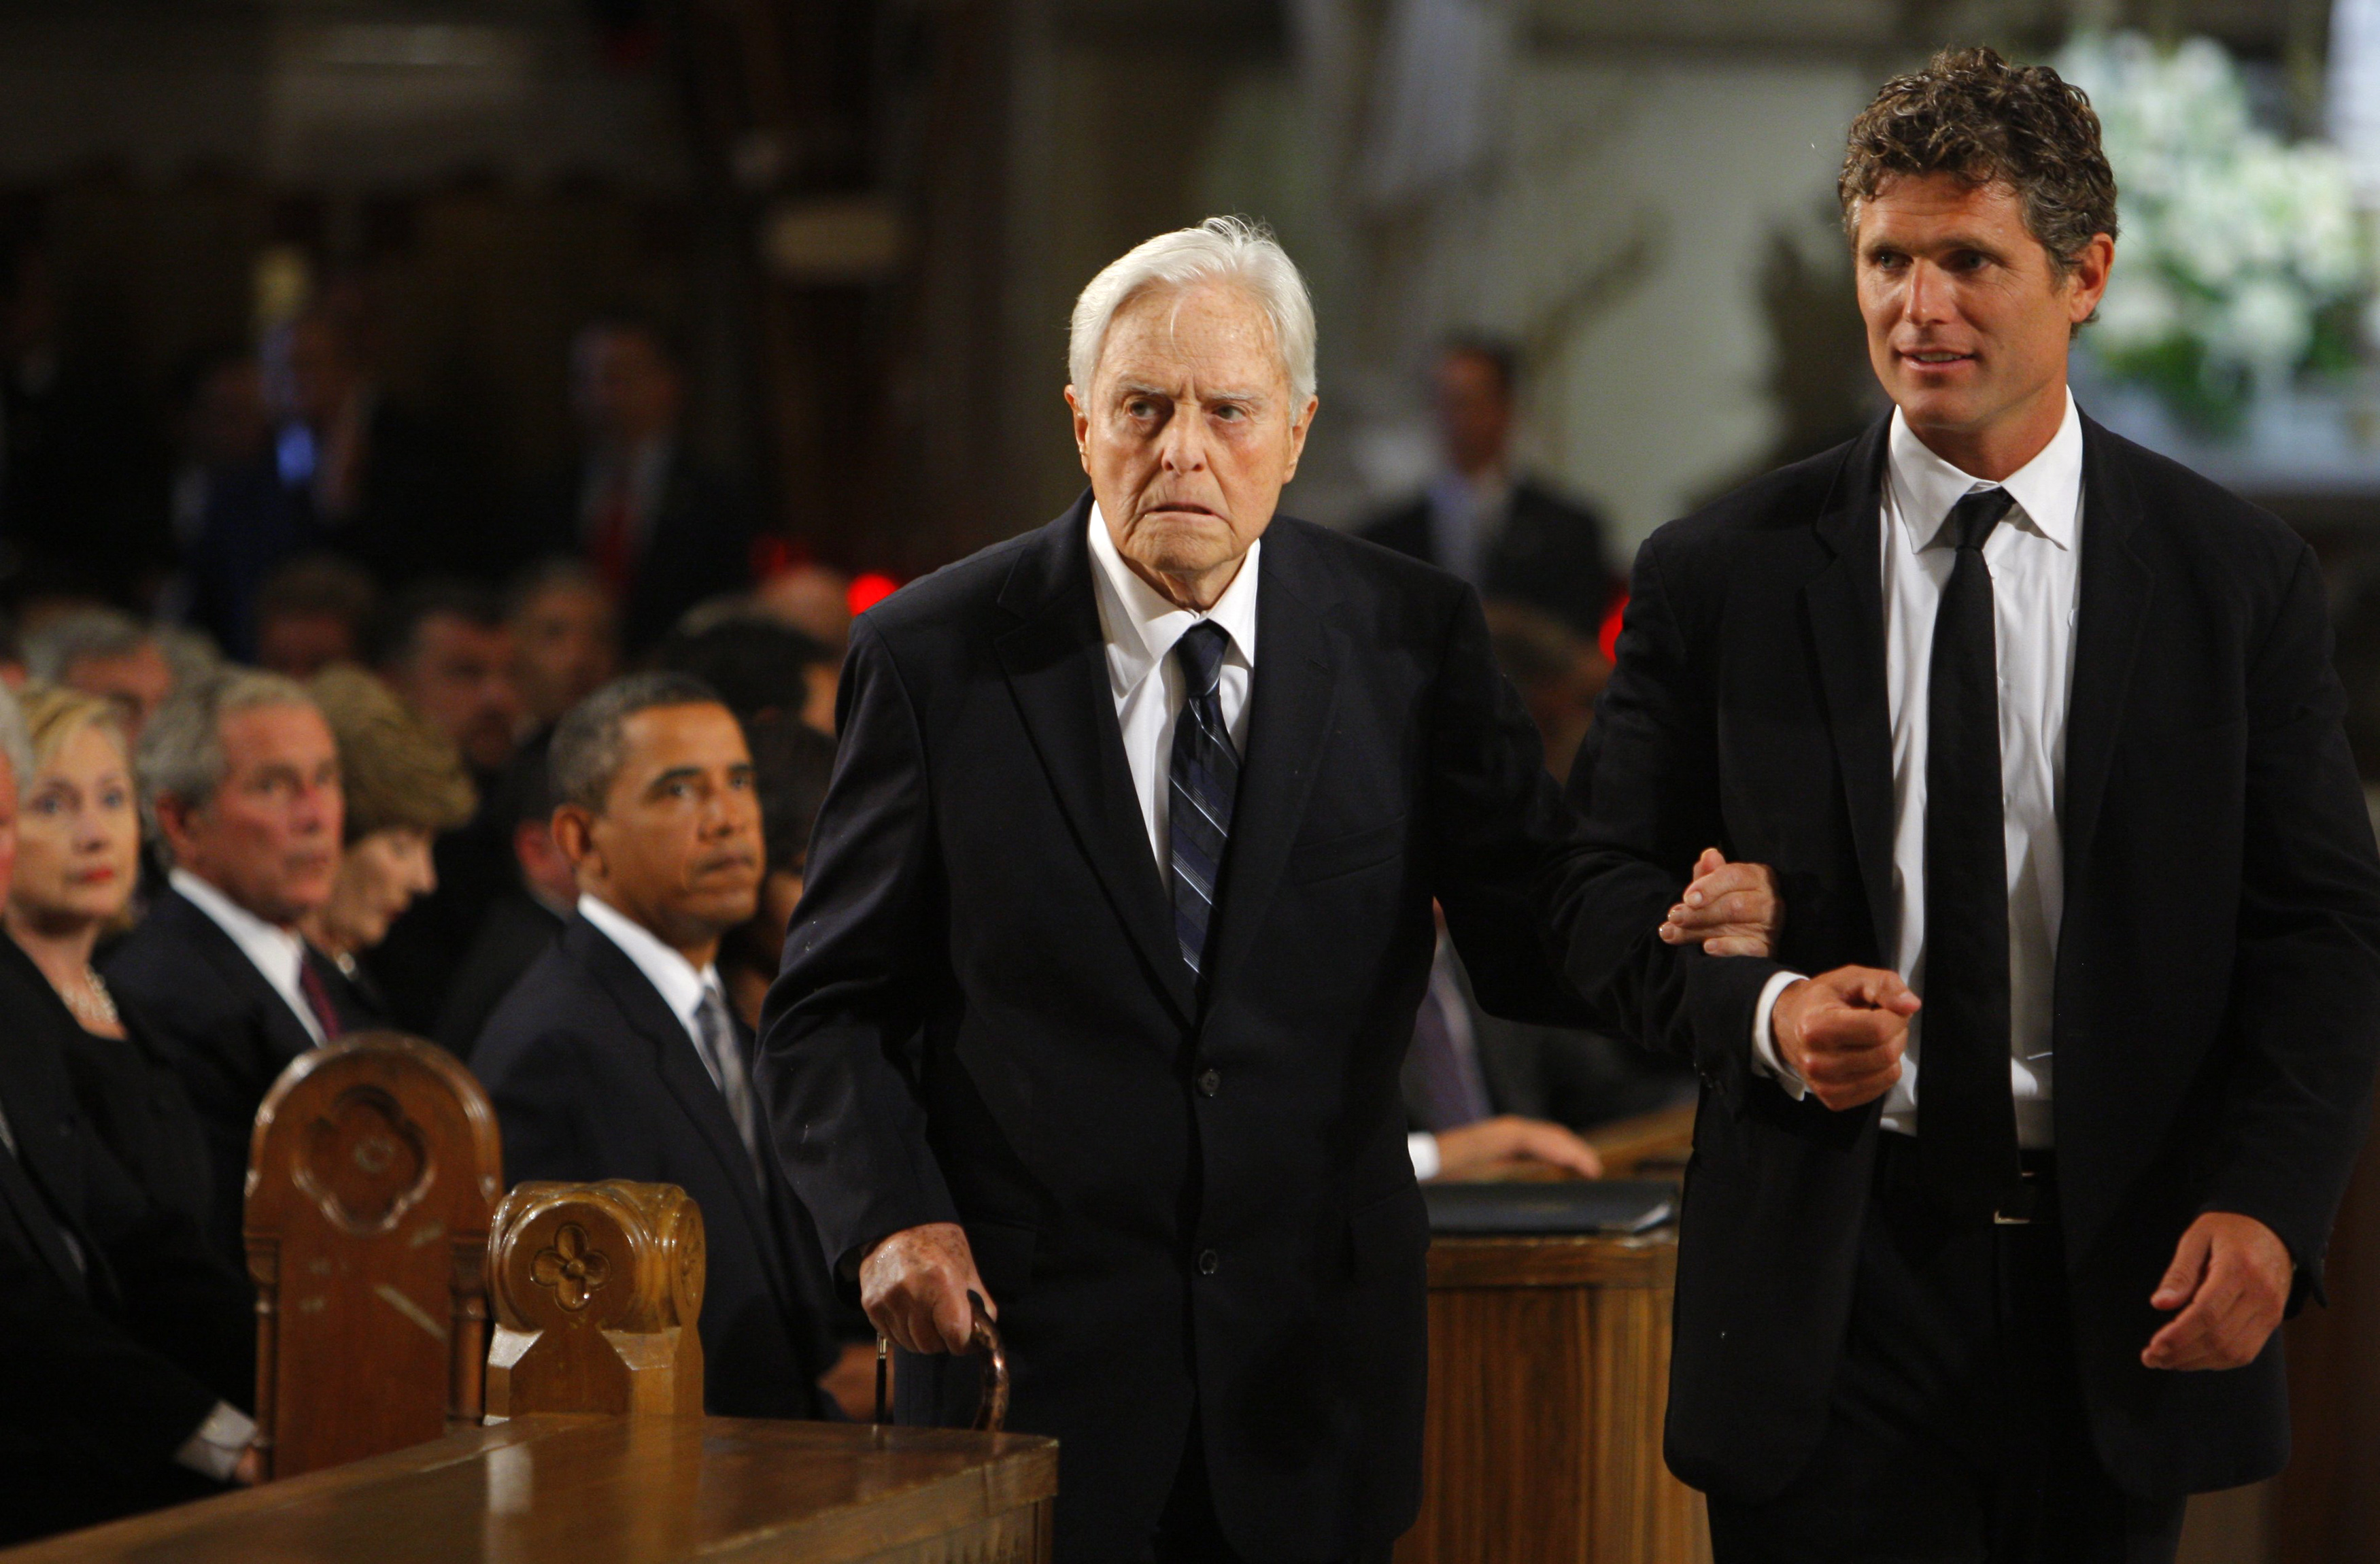 R. Sargent Shriver, left, is escorted to his seat his son, Anthony Kennedy Shriver, before funeral services for Sen. Edward M. Kennedy in August 2009. (Pool photo by Brian Snyder via AP)